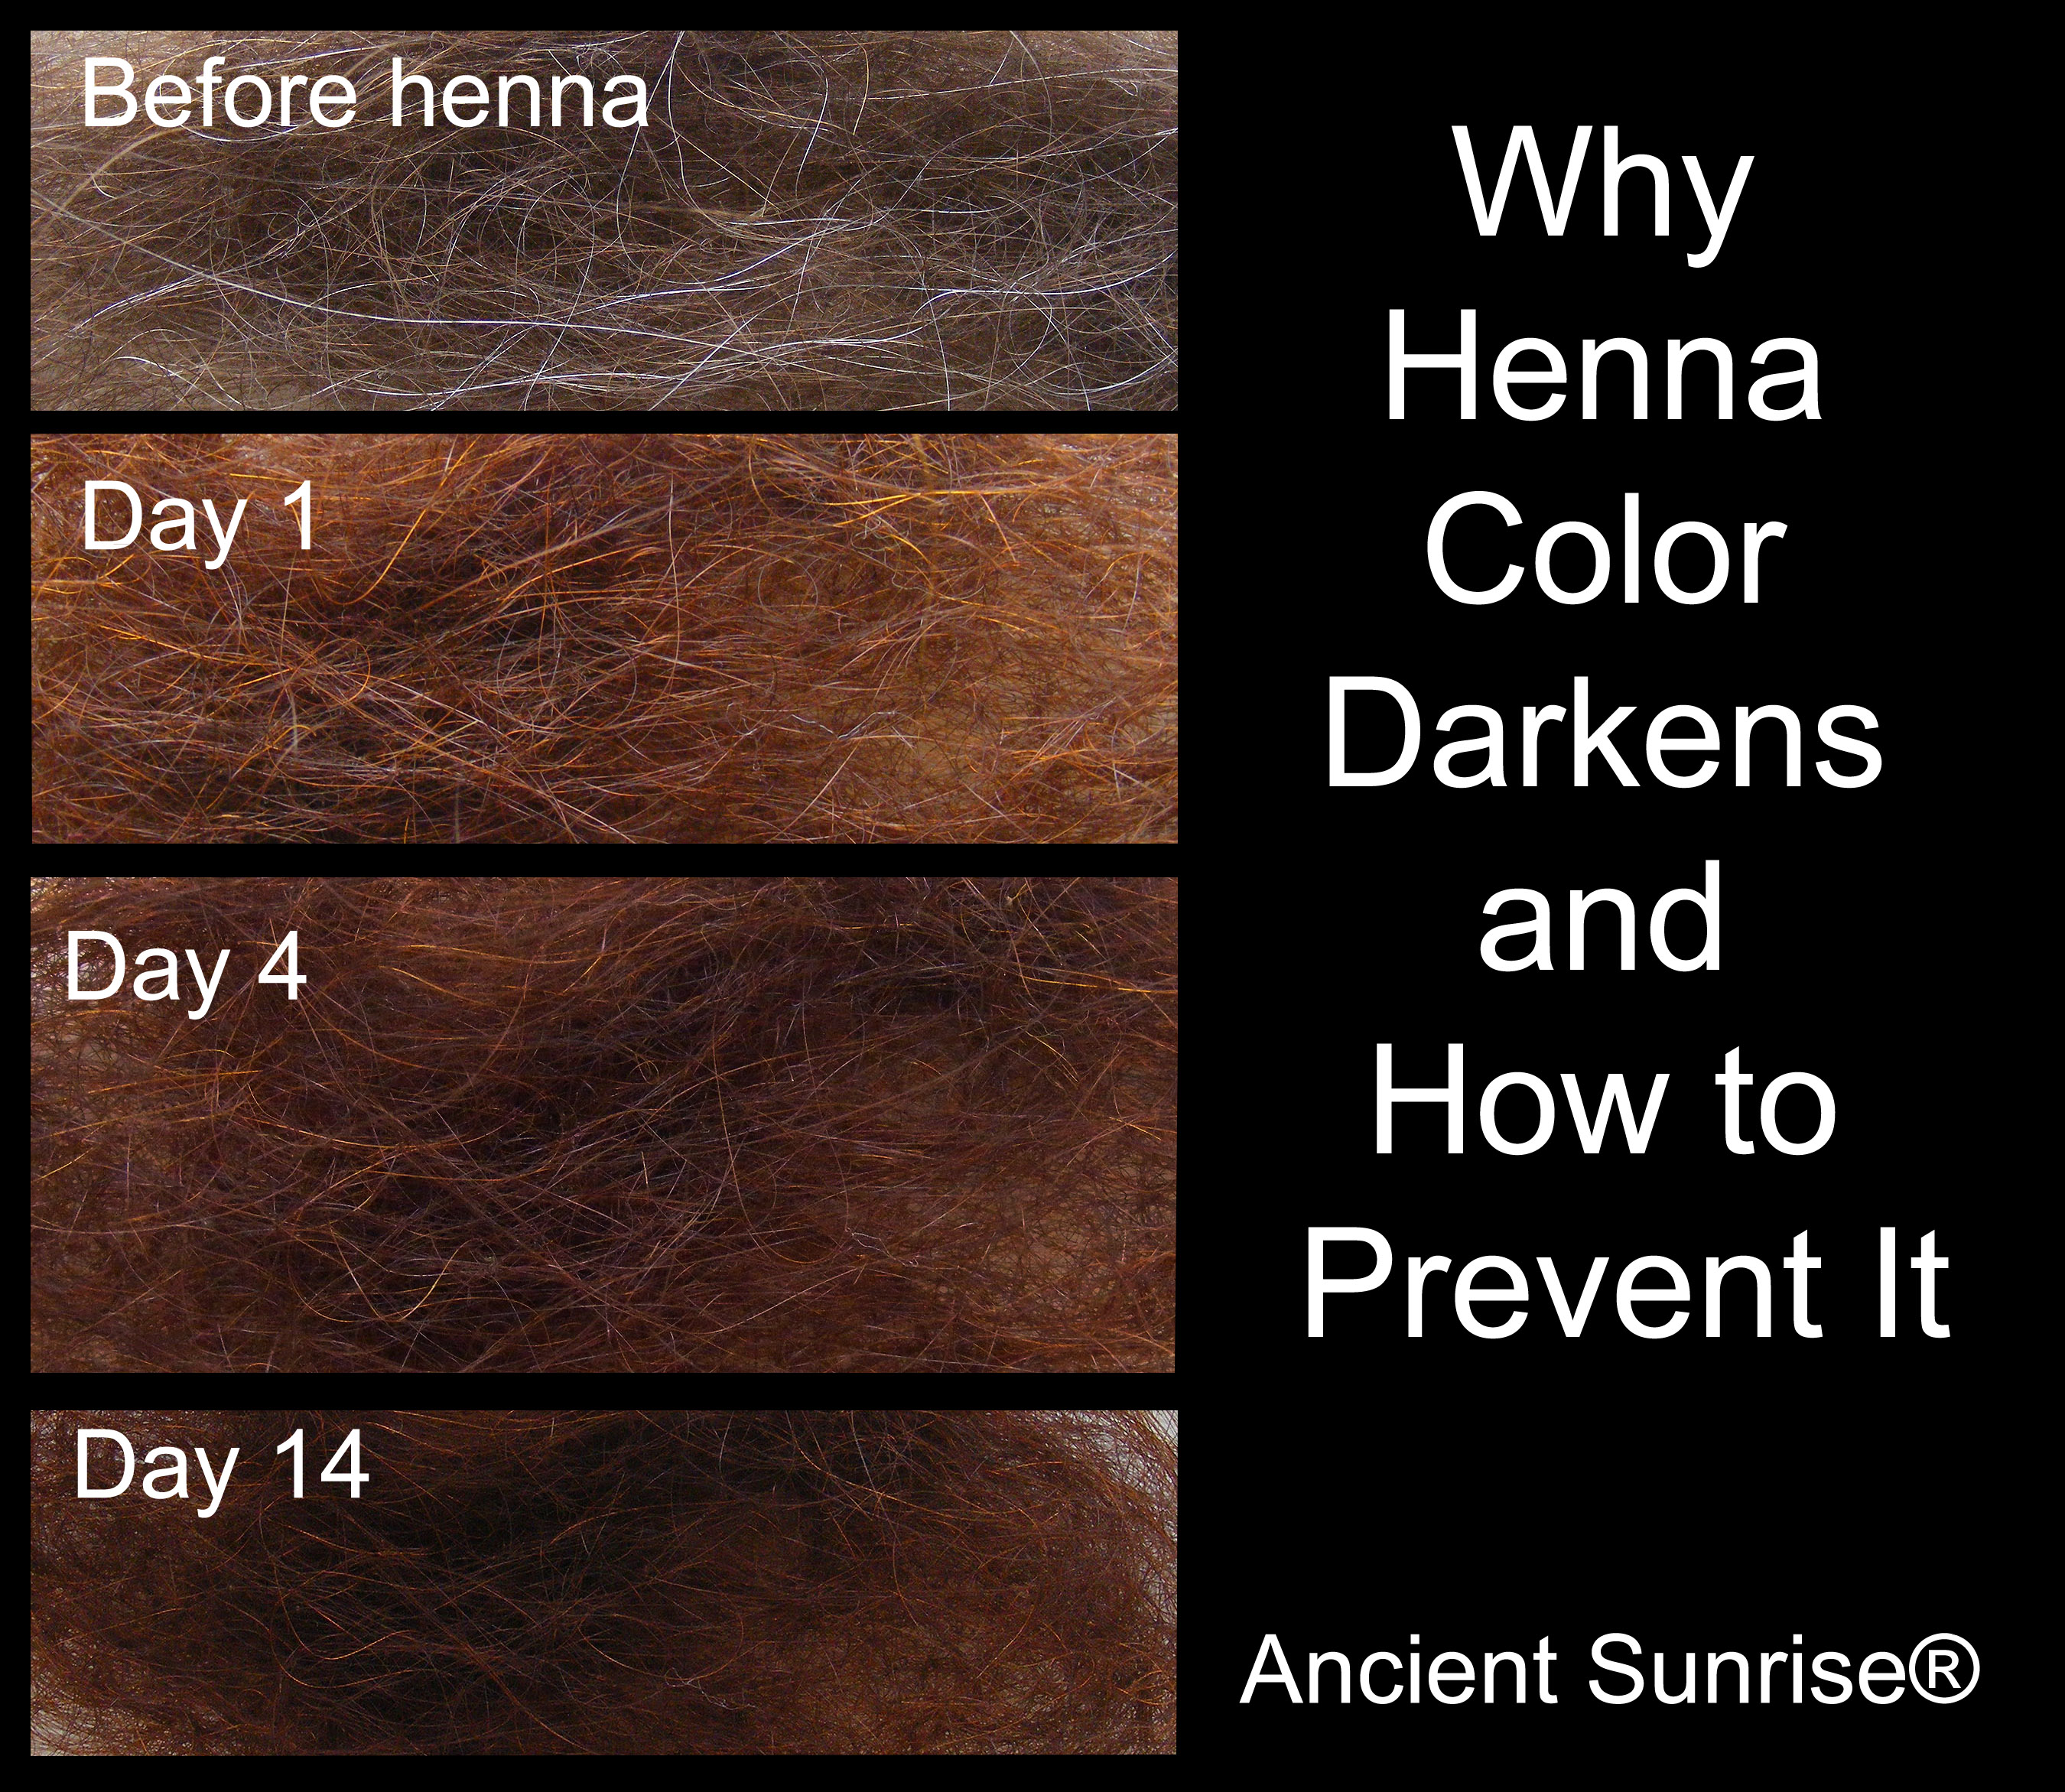 Why Henna Color Darkens and How to Prevent It